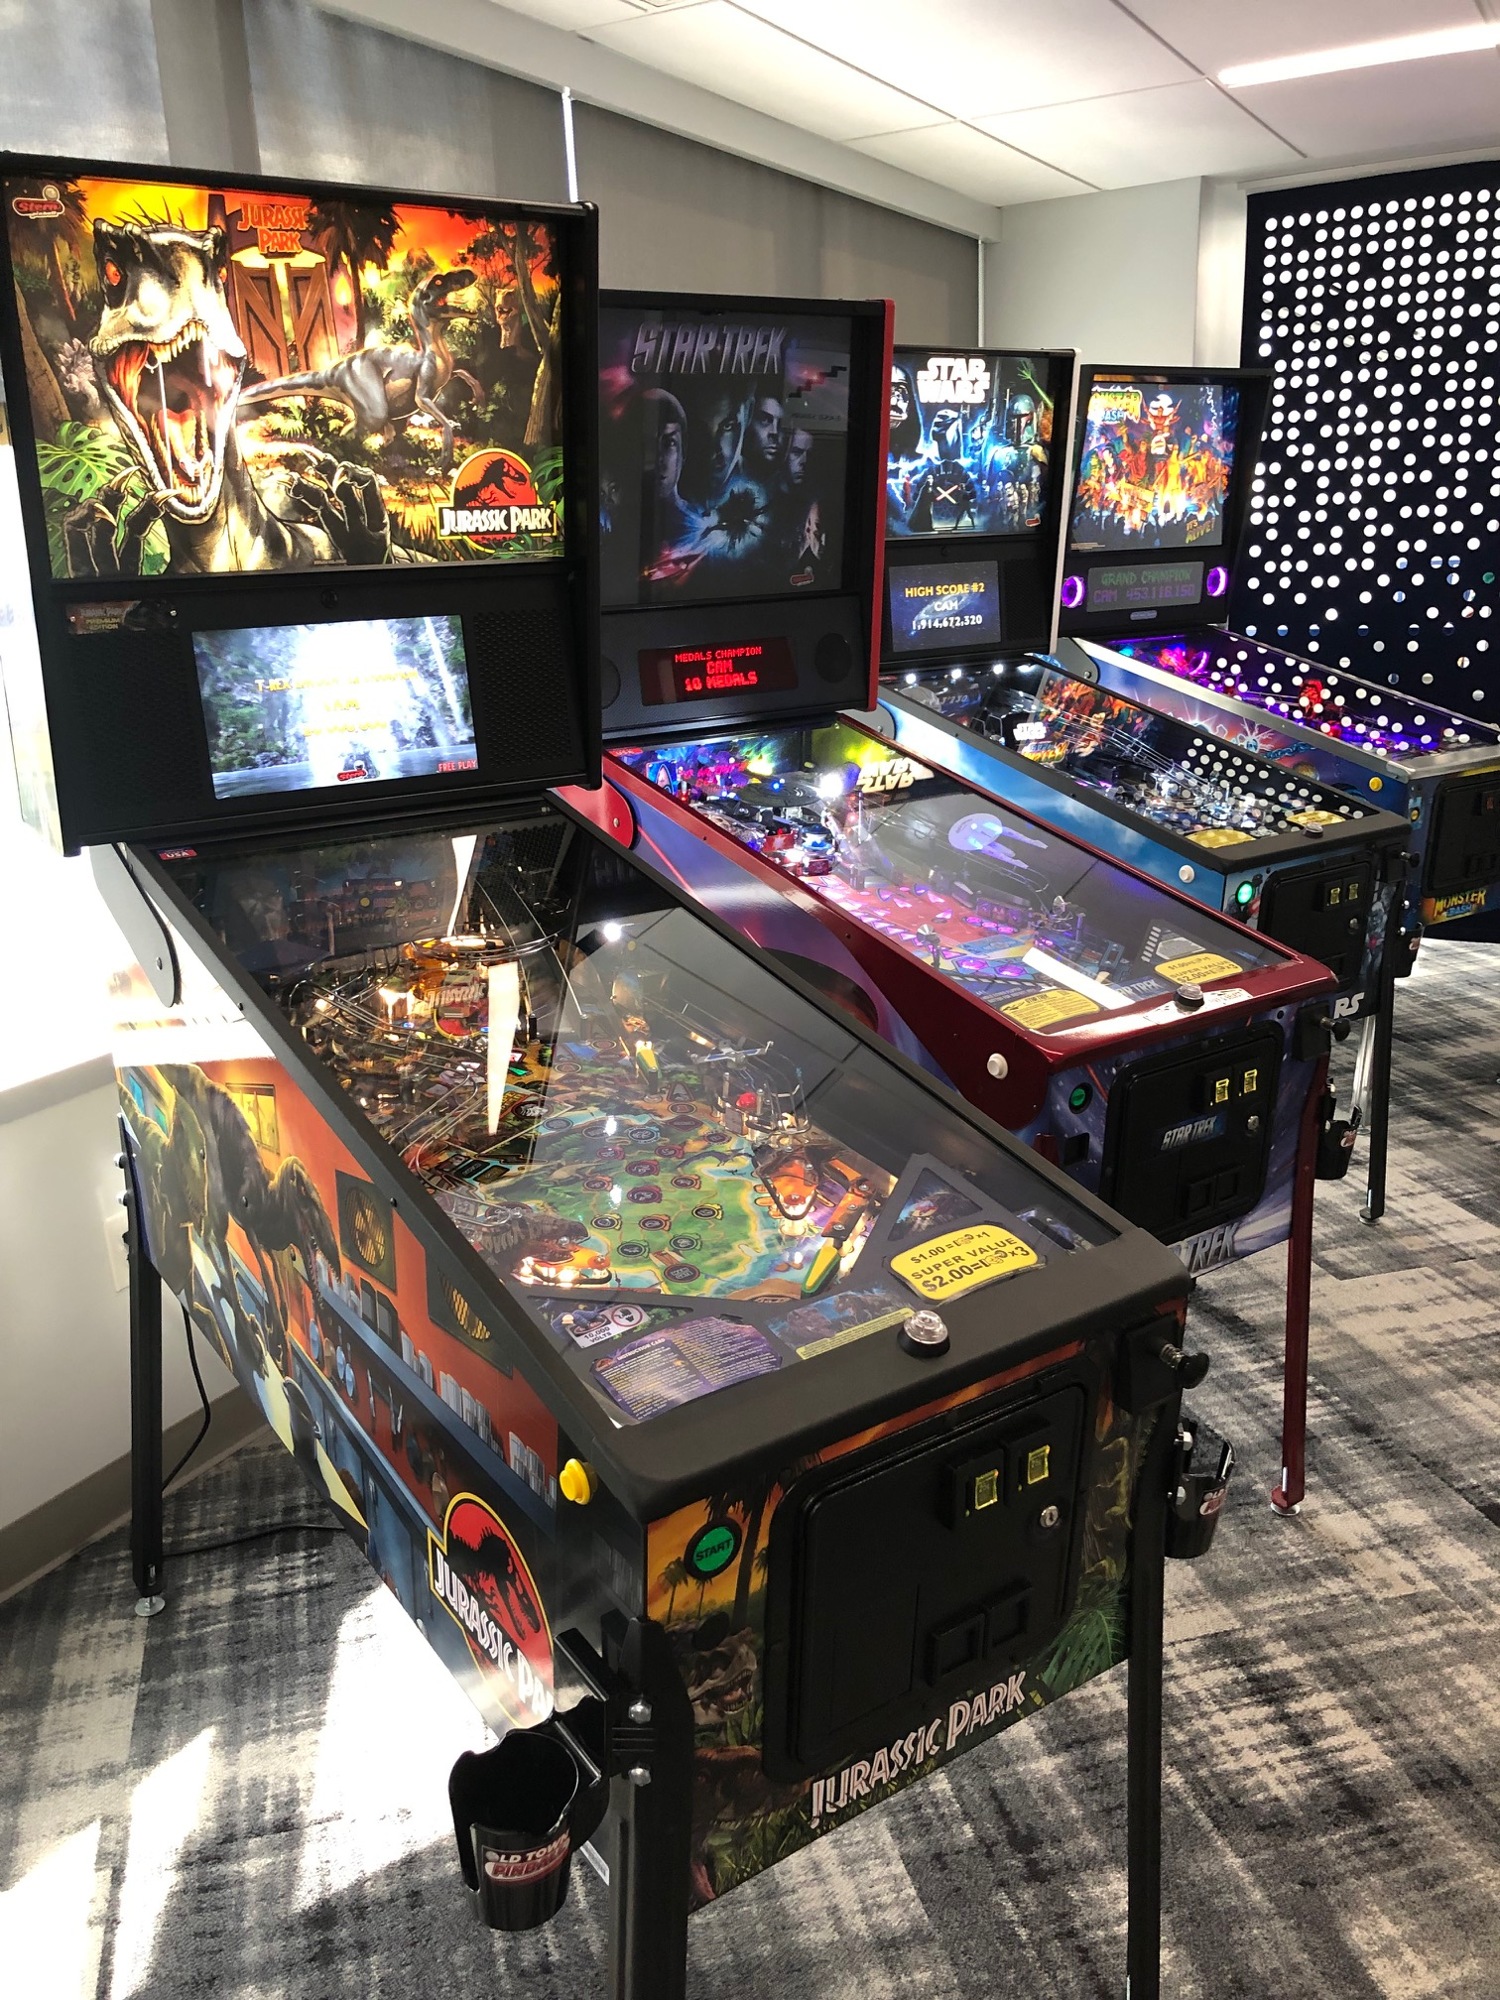 VyStar employees can take a break with a game of pinball.